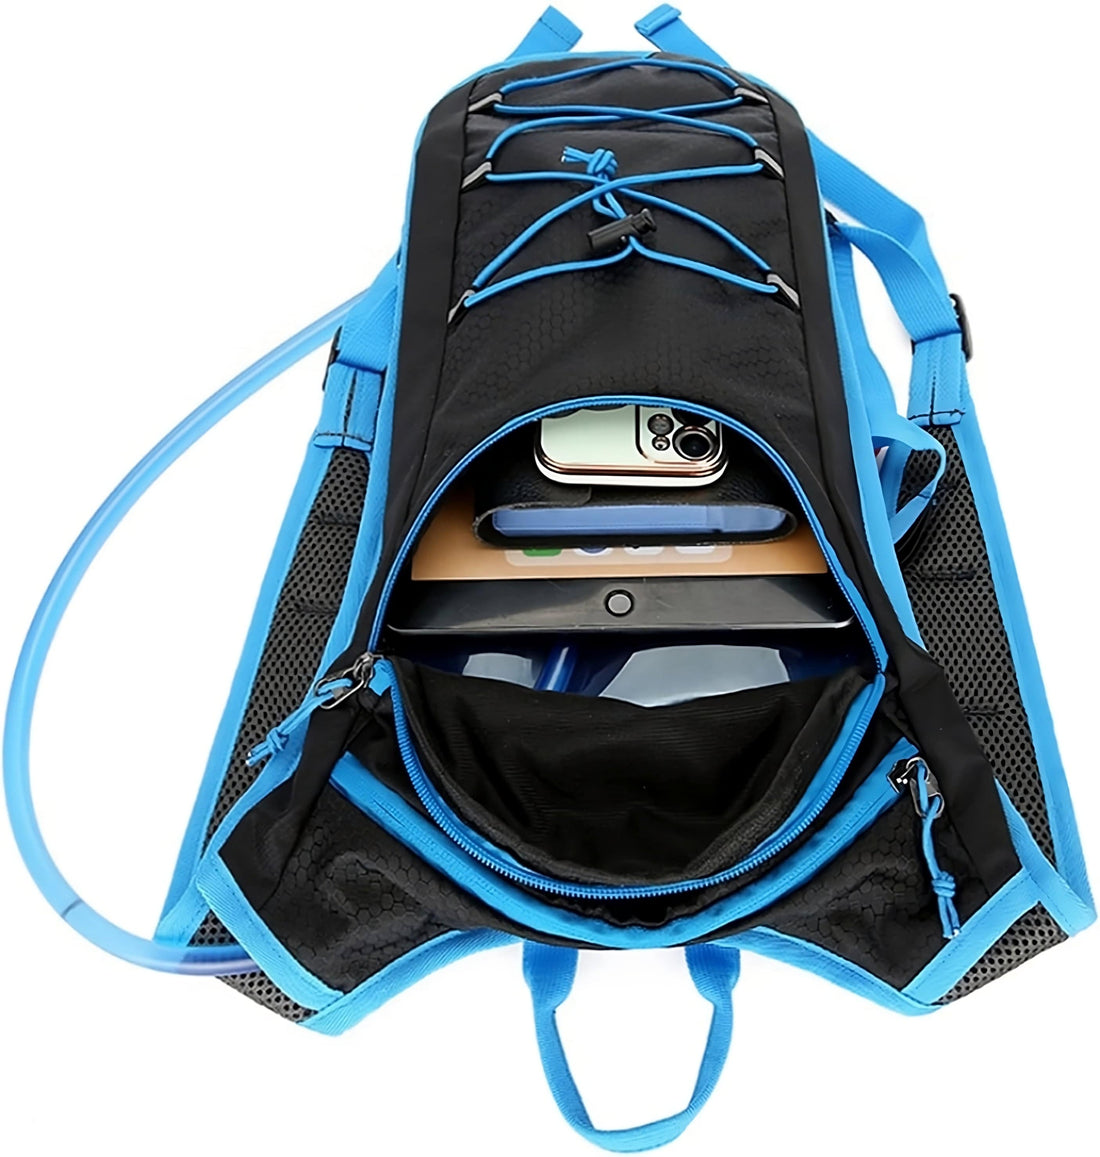 Rave Essentials Co. RE® Essential Hydration Backpack